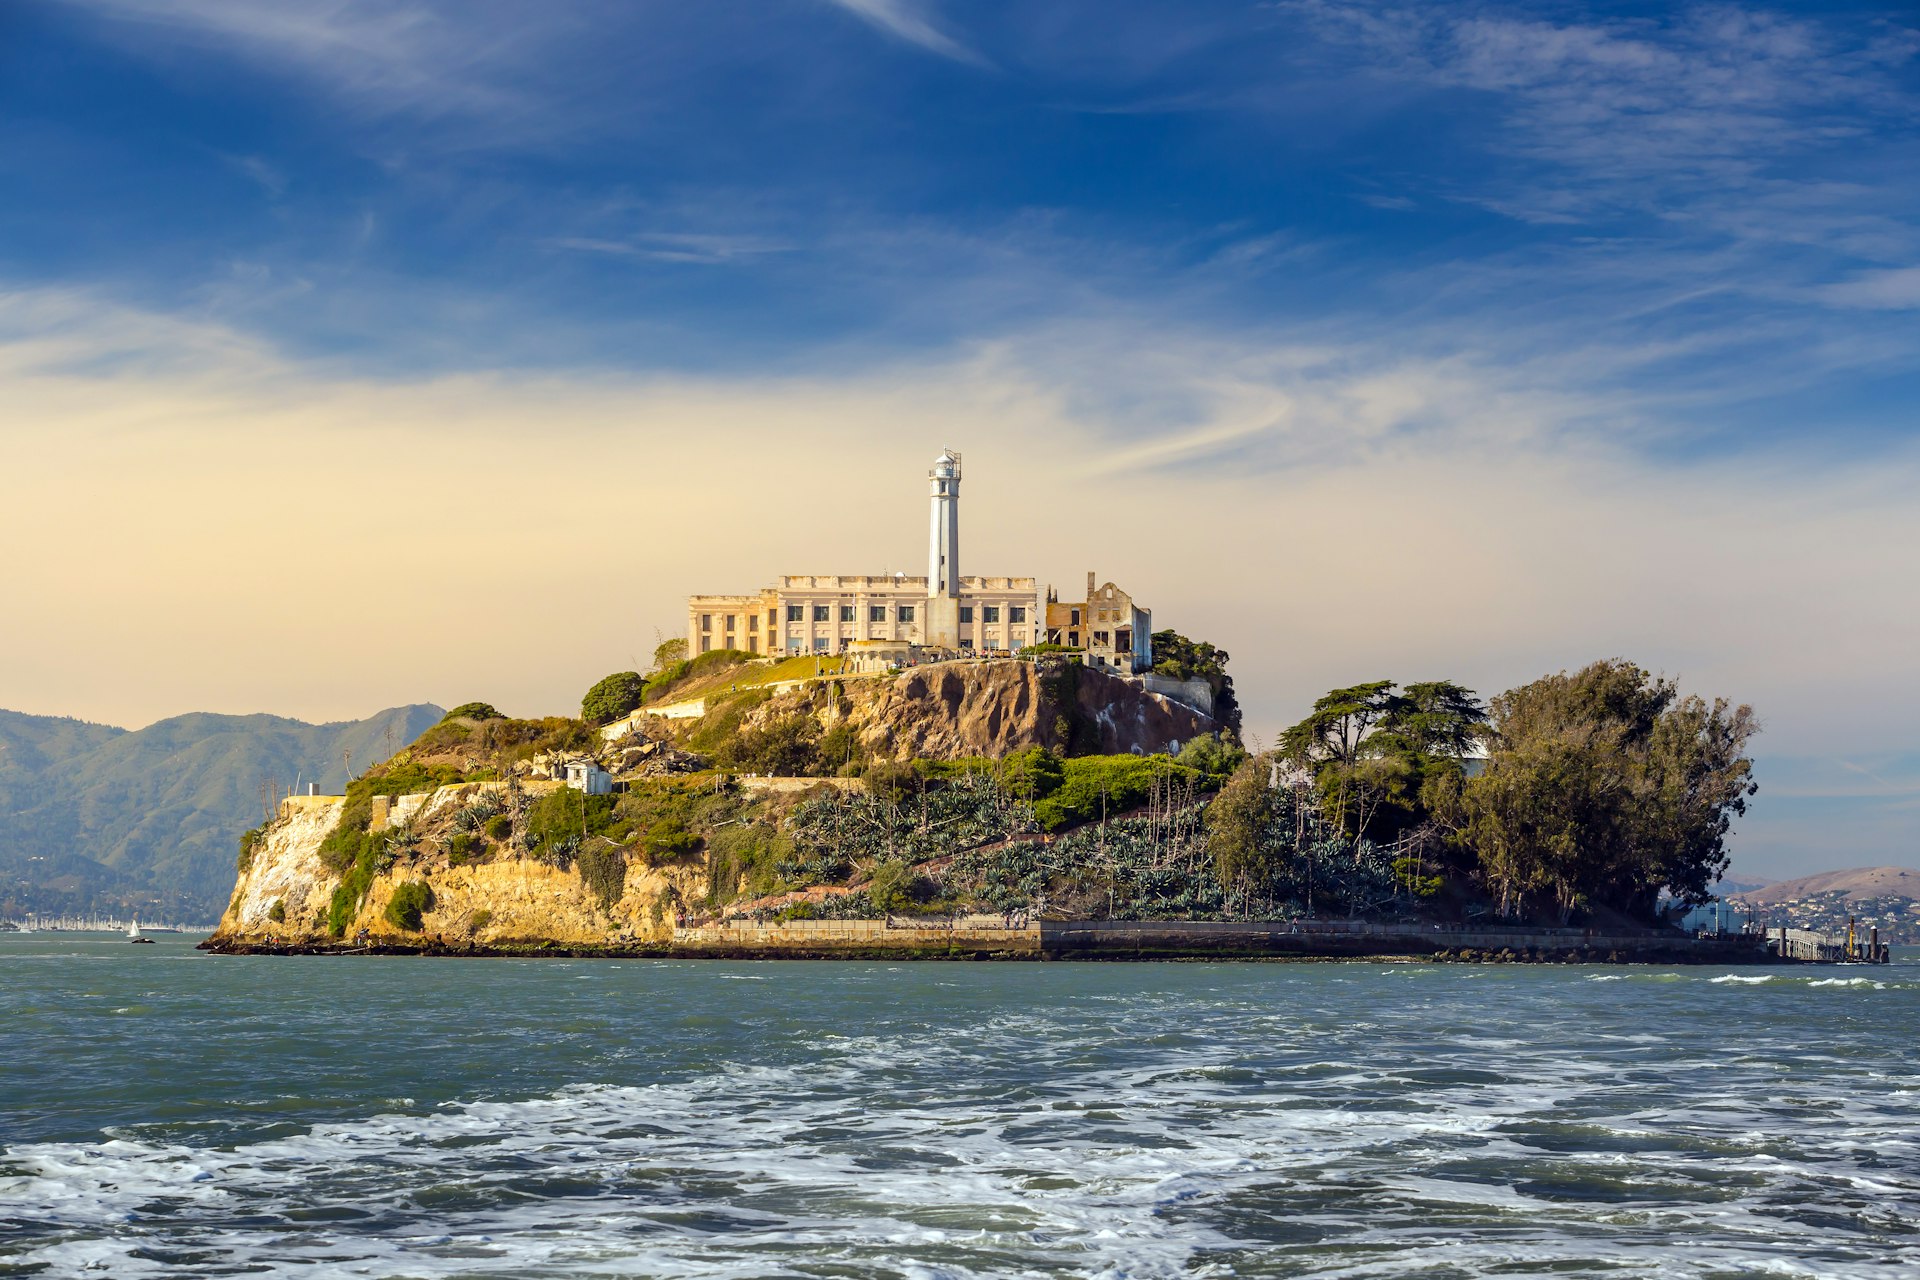 A view of Alcatraz Island in San Francisco, USA, taken from a boat.